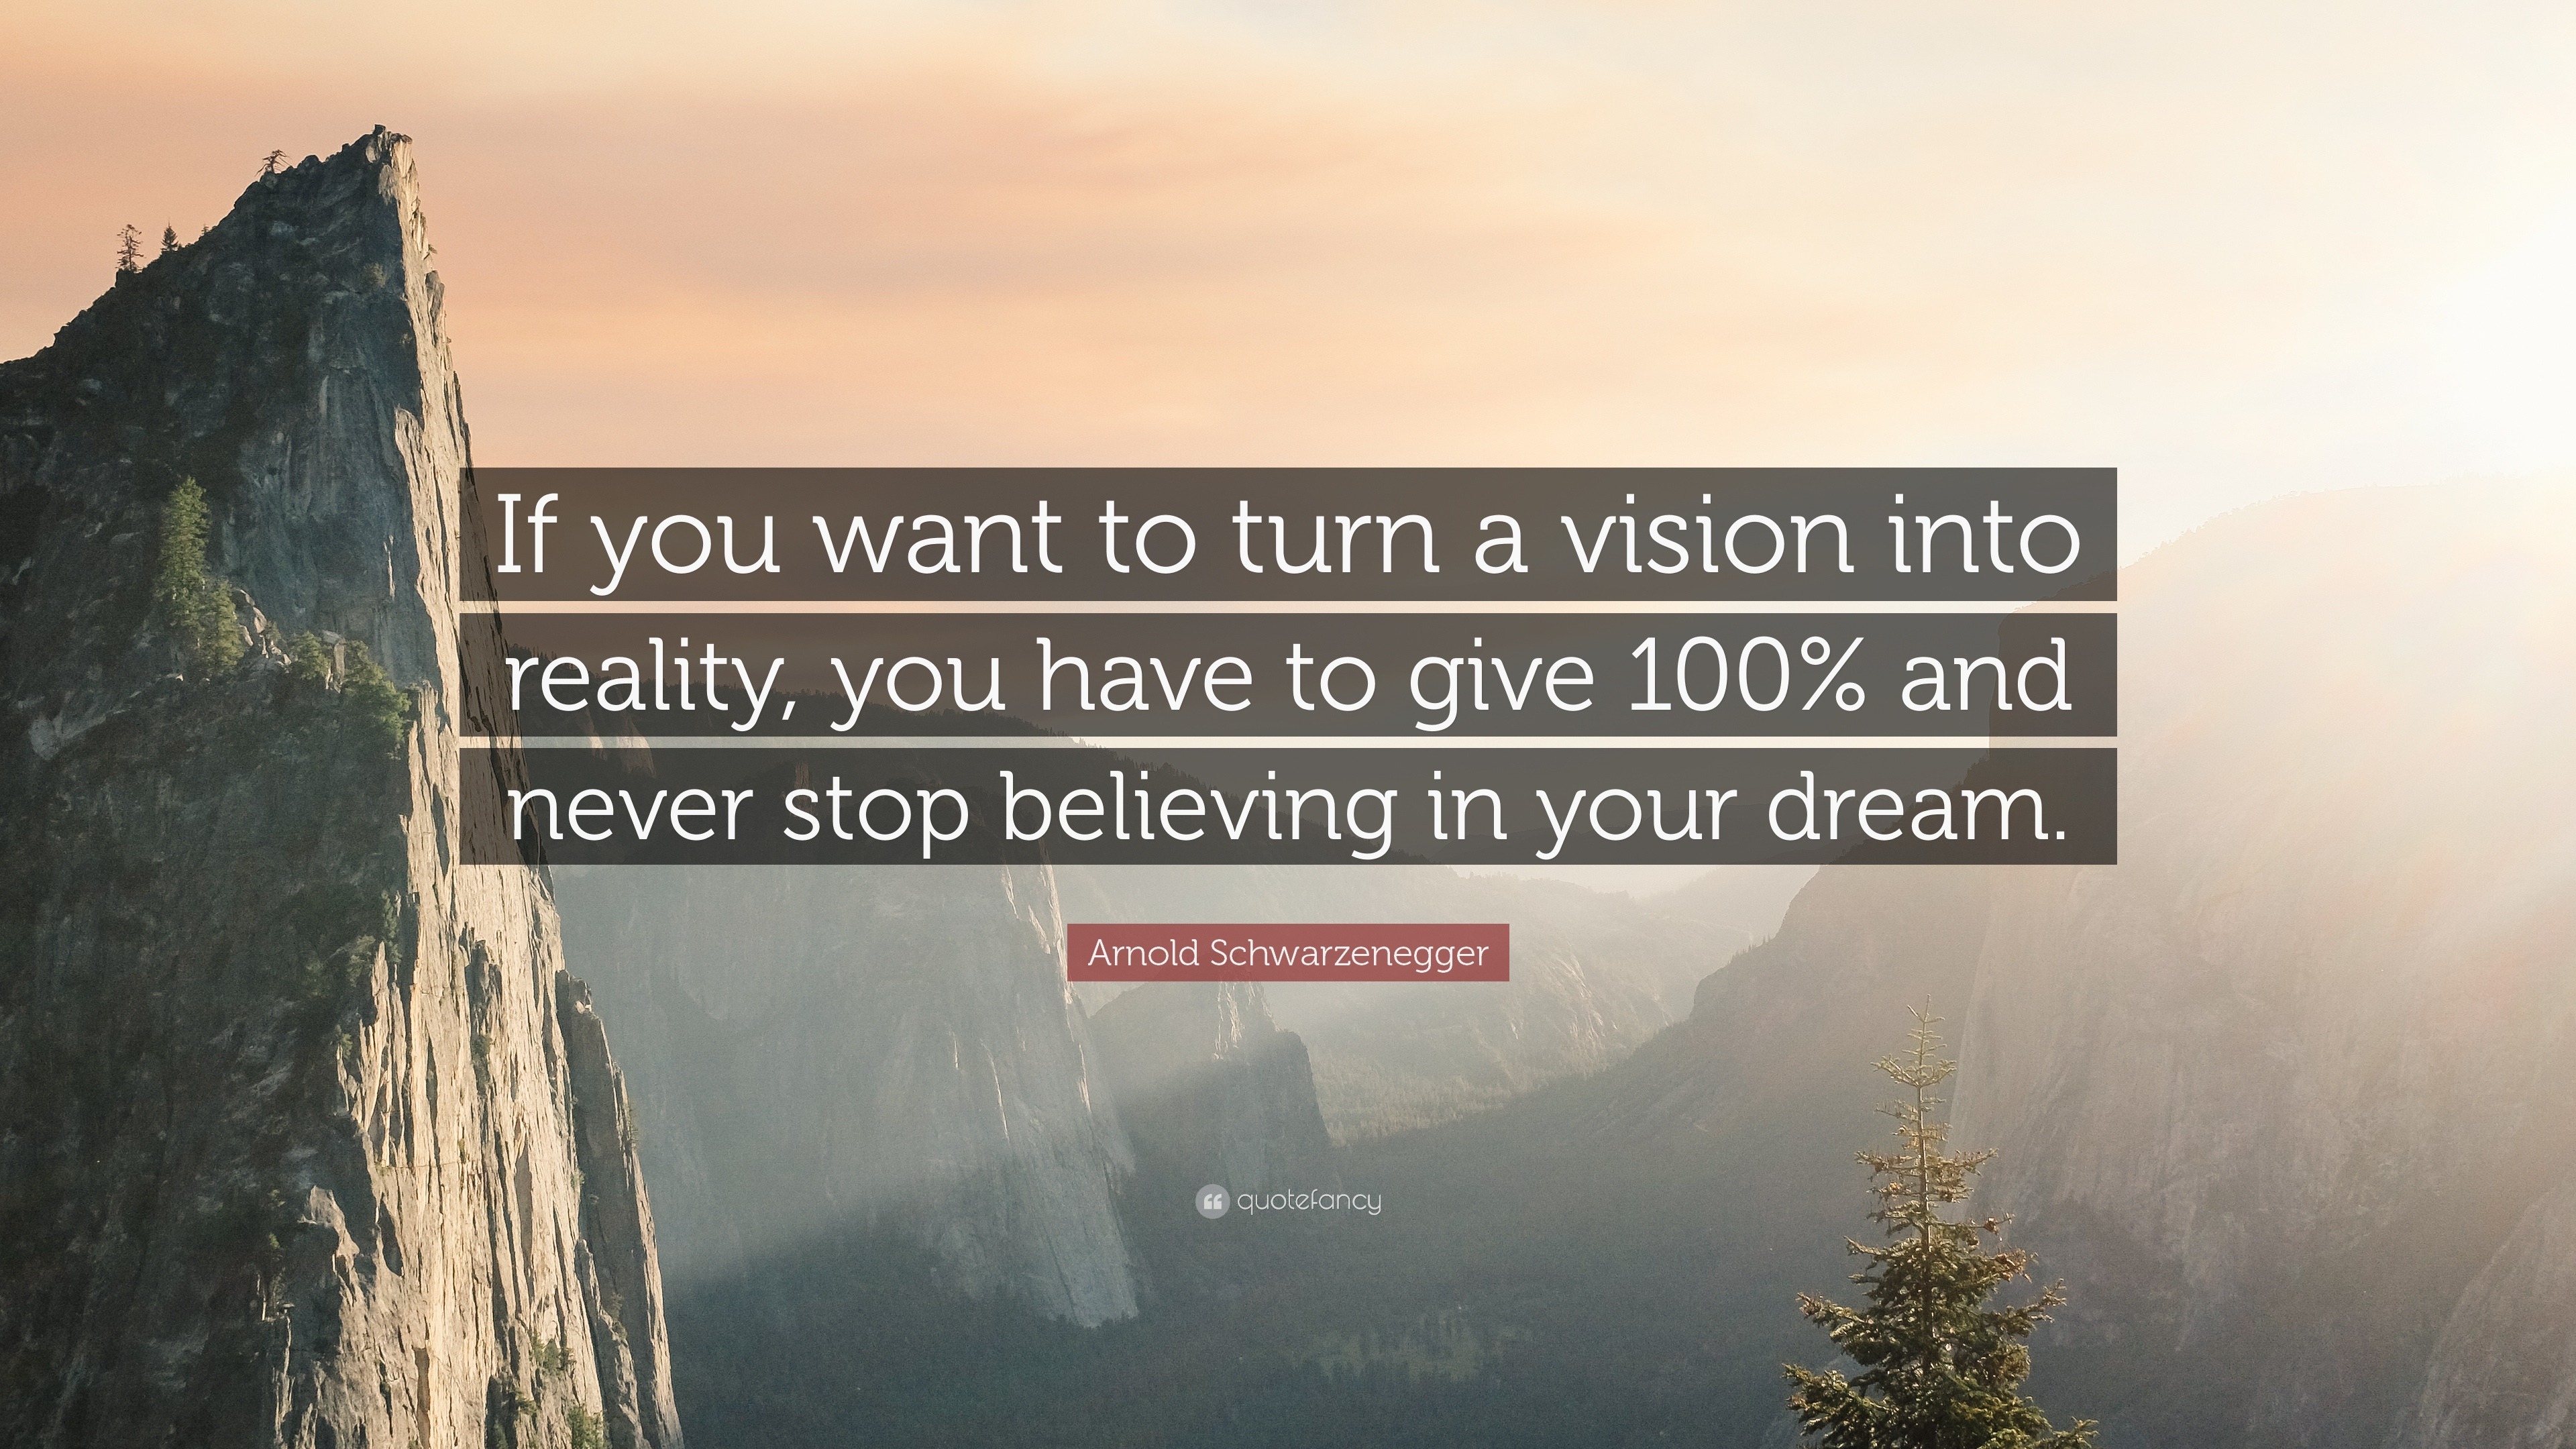 Arnold Schwarzenegger Quote “if You Want To Turn A Vision Into Reality